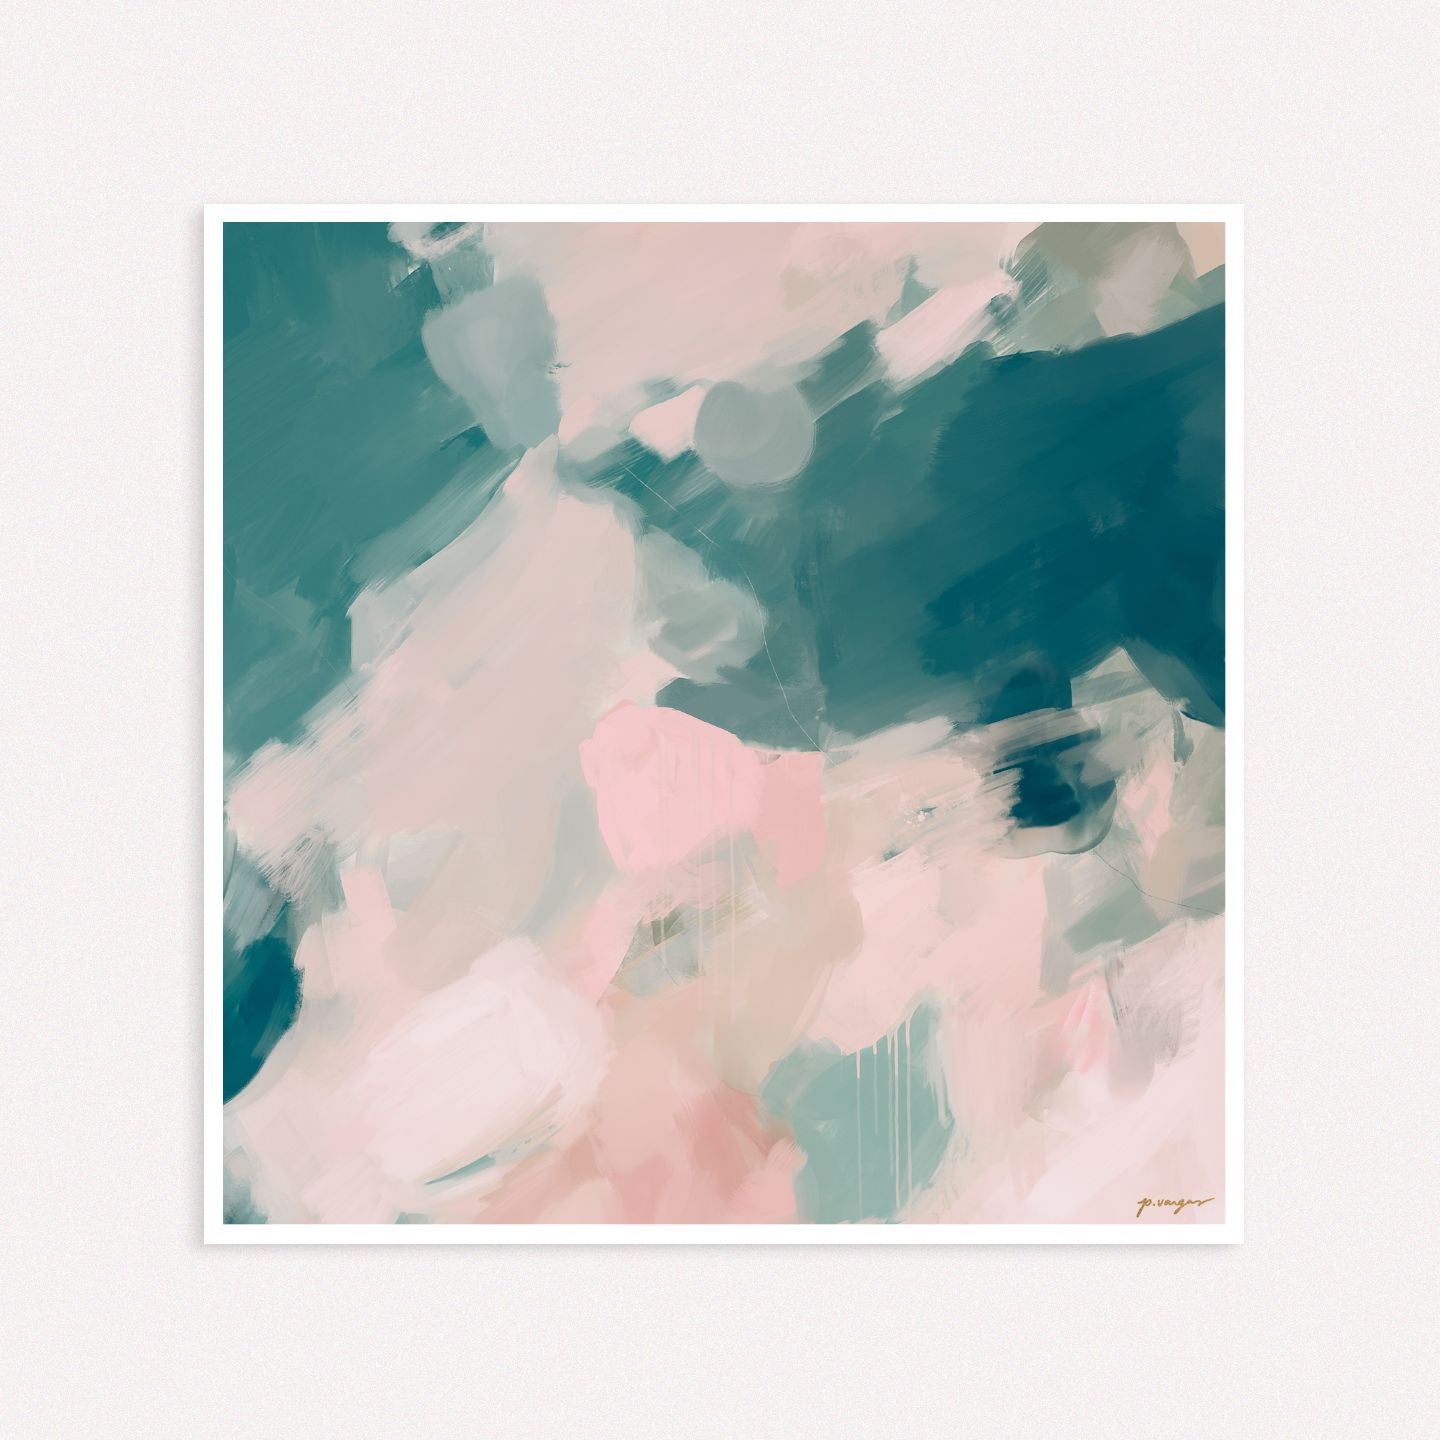 Mink, pink and green colorful abstract wall art print by Parima Studio